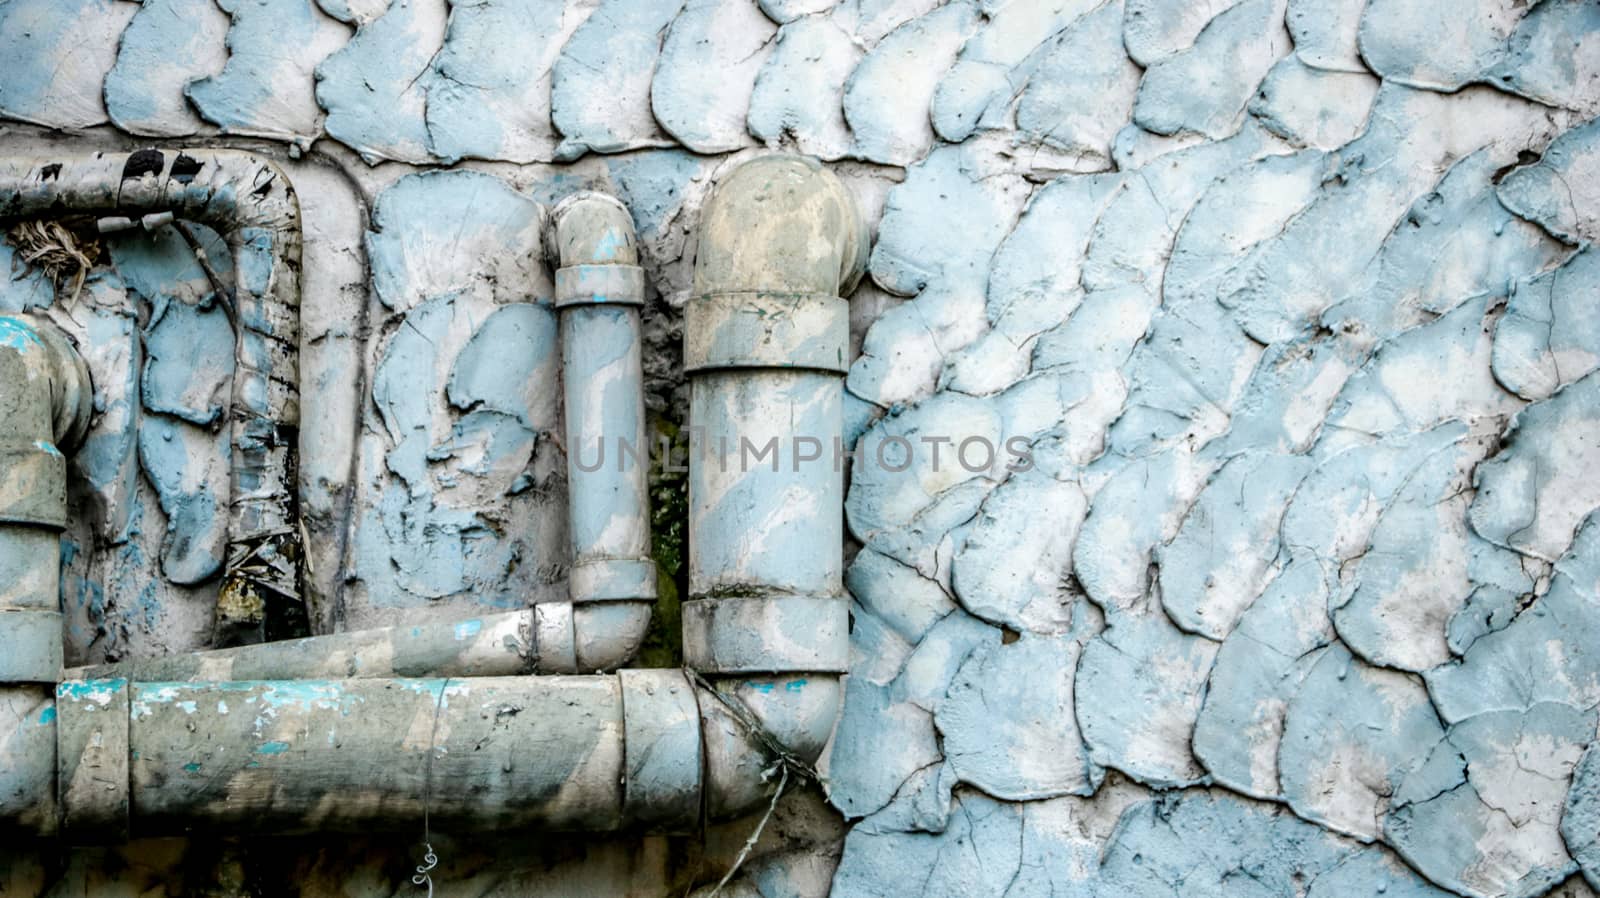 Old Dirty Water Pipes on Vintage Painted Wall Texture - Blue/ Teal Pastel. Outside local house in the countryside Thailand.